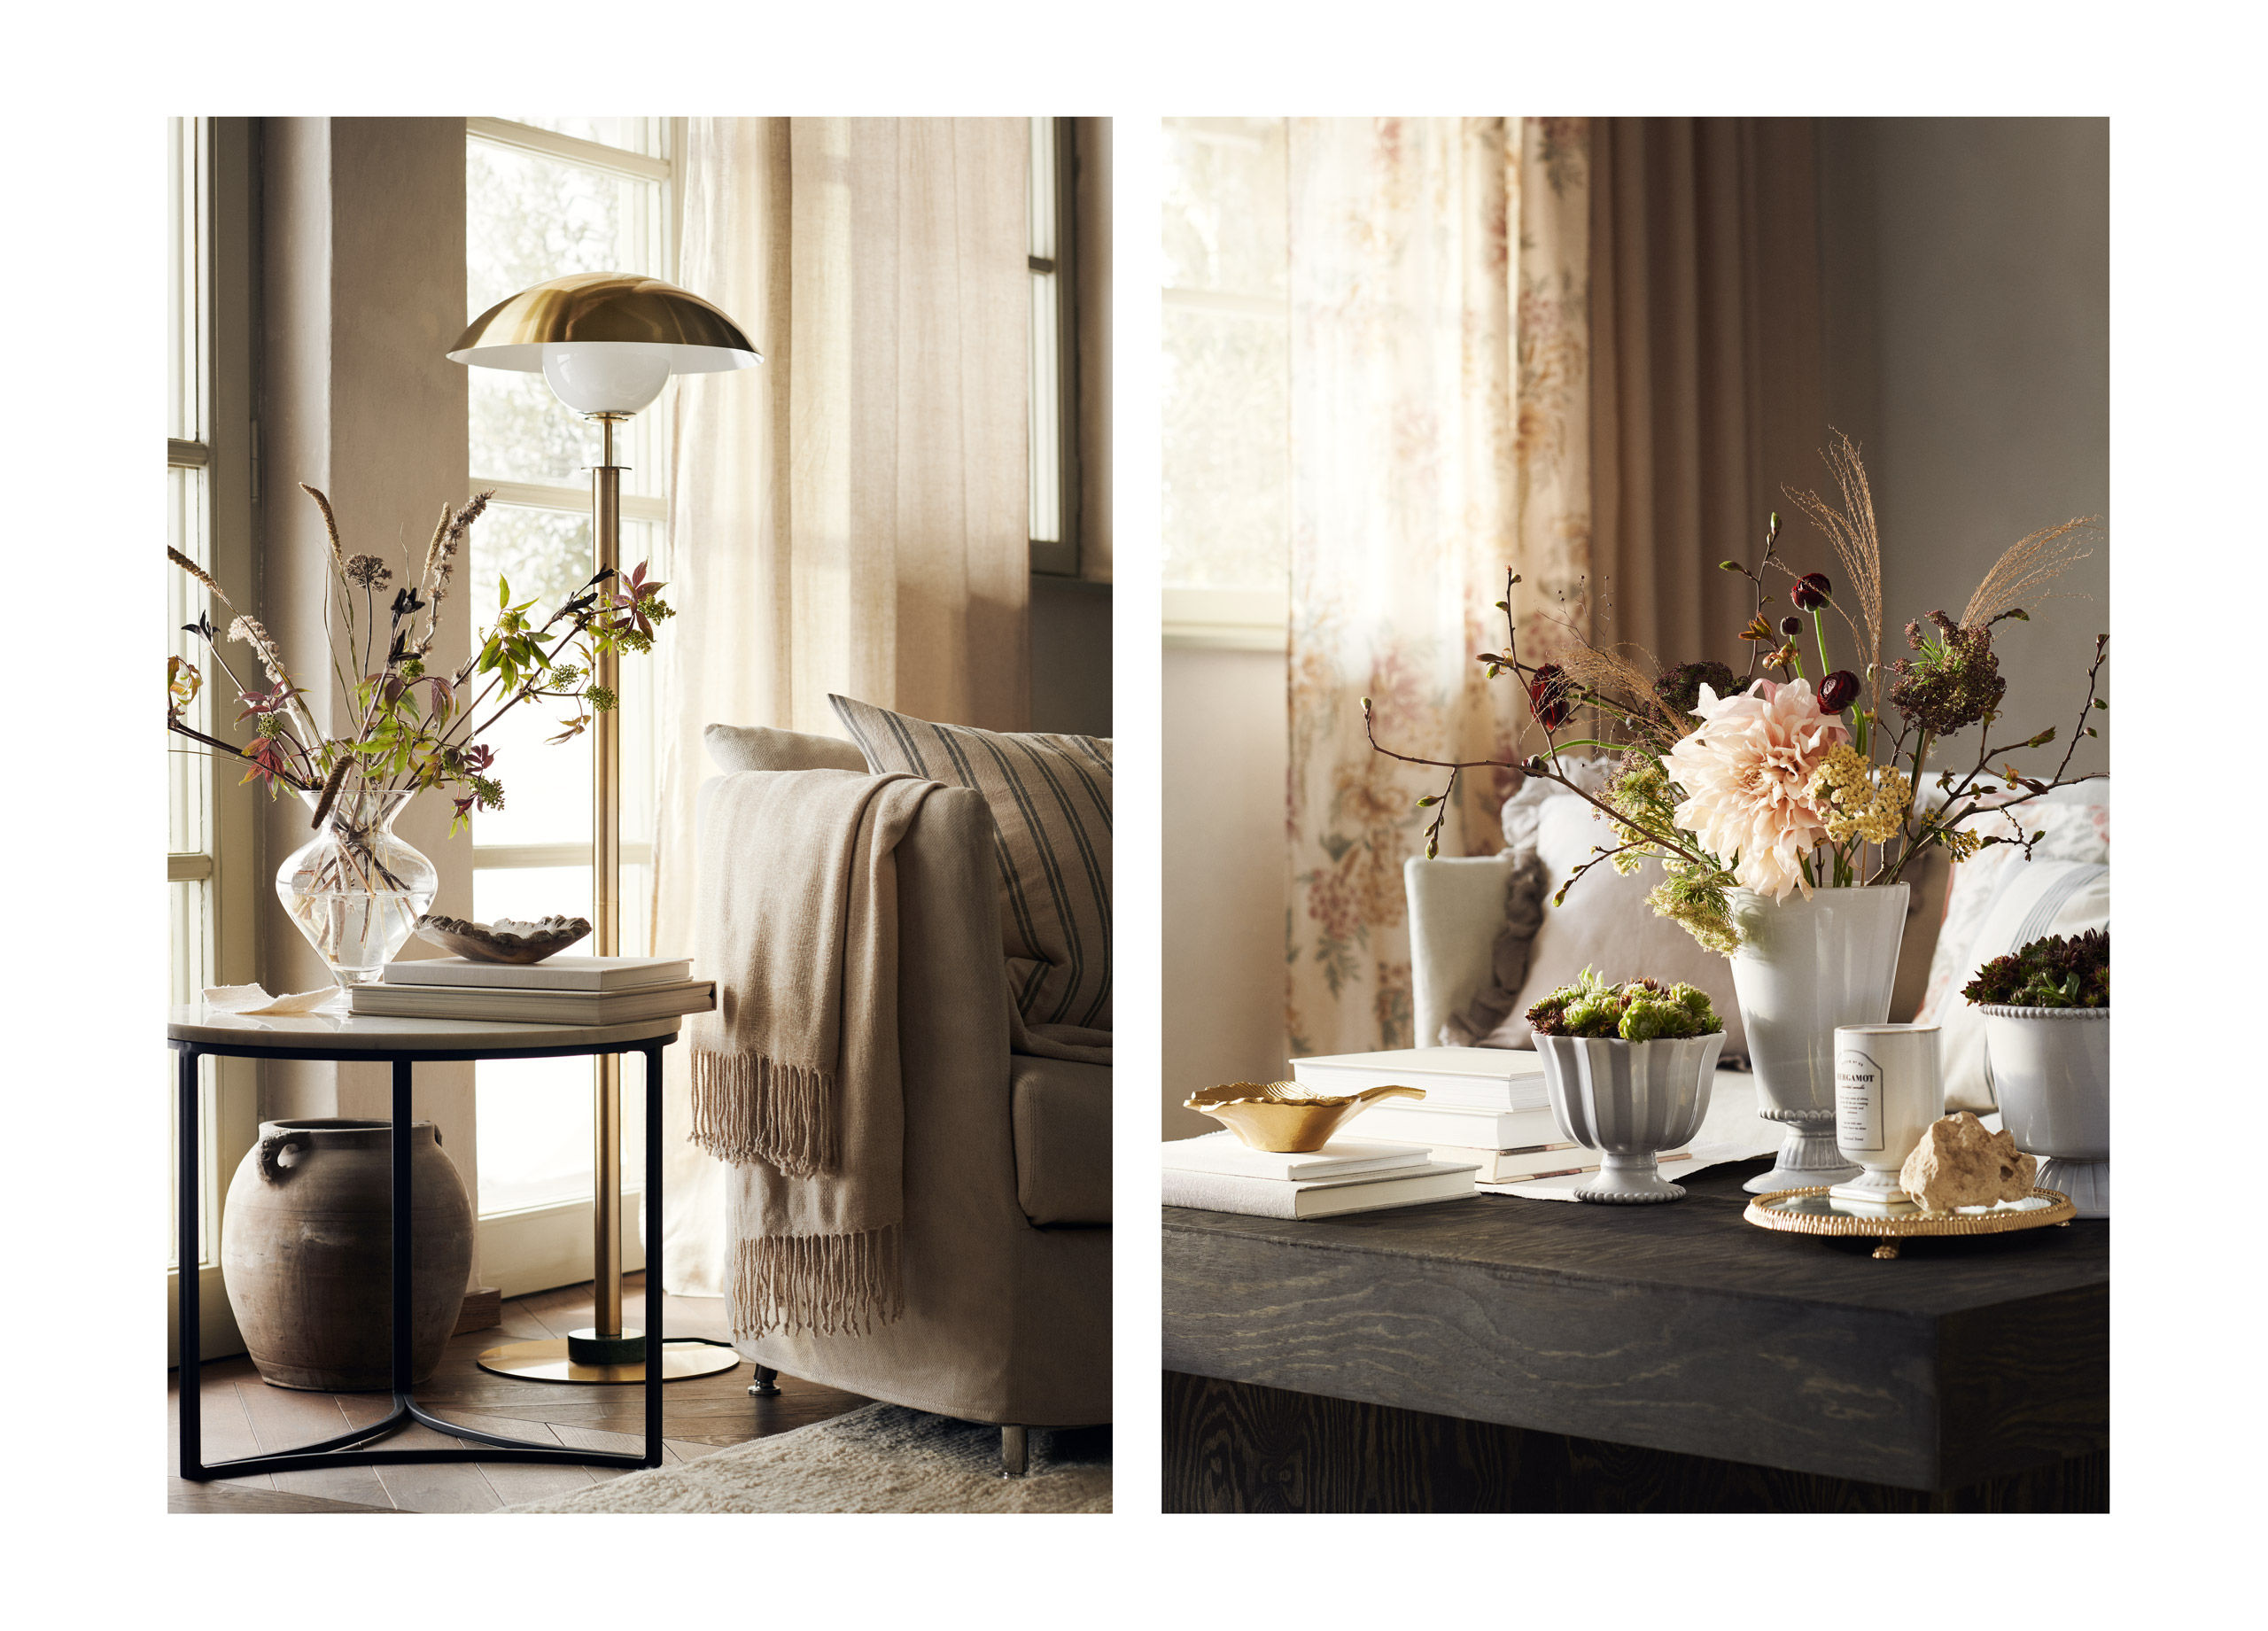 <p><span style="font-size: 12px;">photographer</span> <span style="font-weight: bold;">Kristofer Johnsson</span></p><p><span style="font-weight: bold;">H&M Home</span></p>